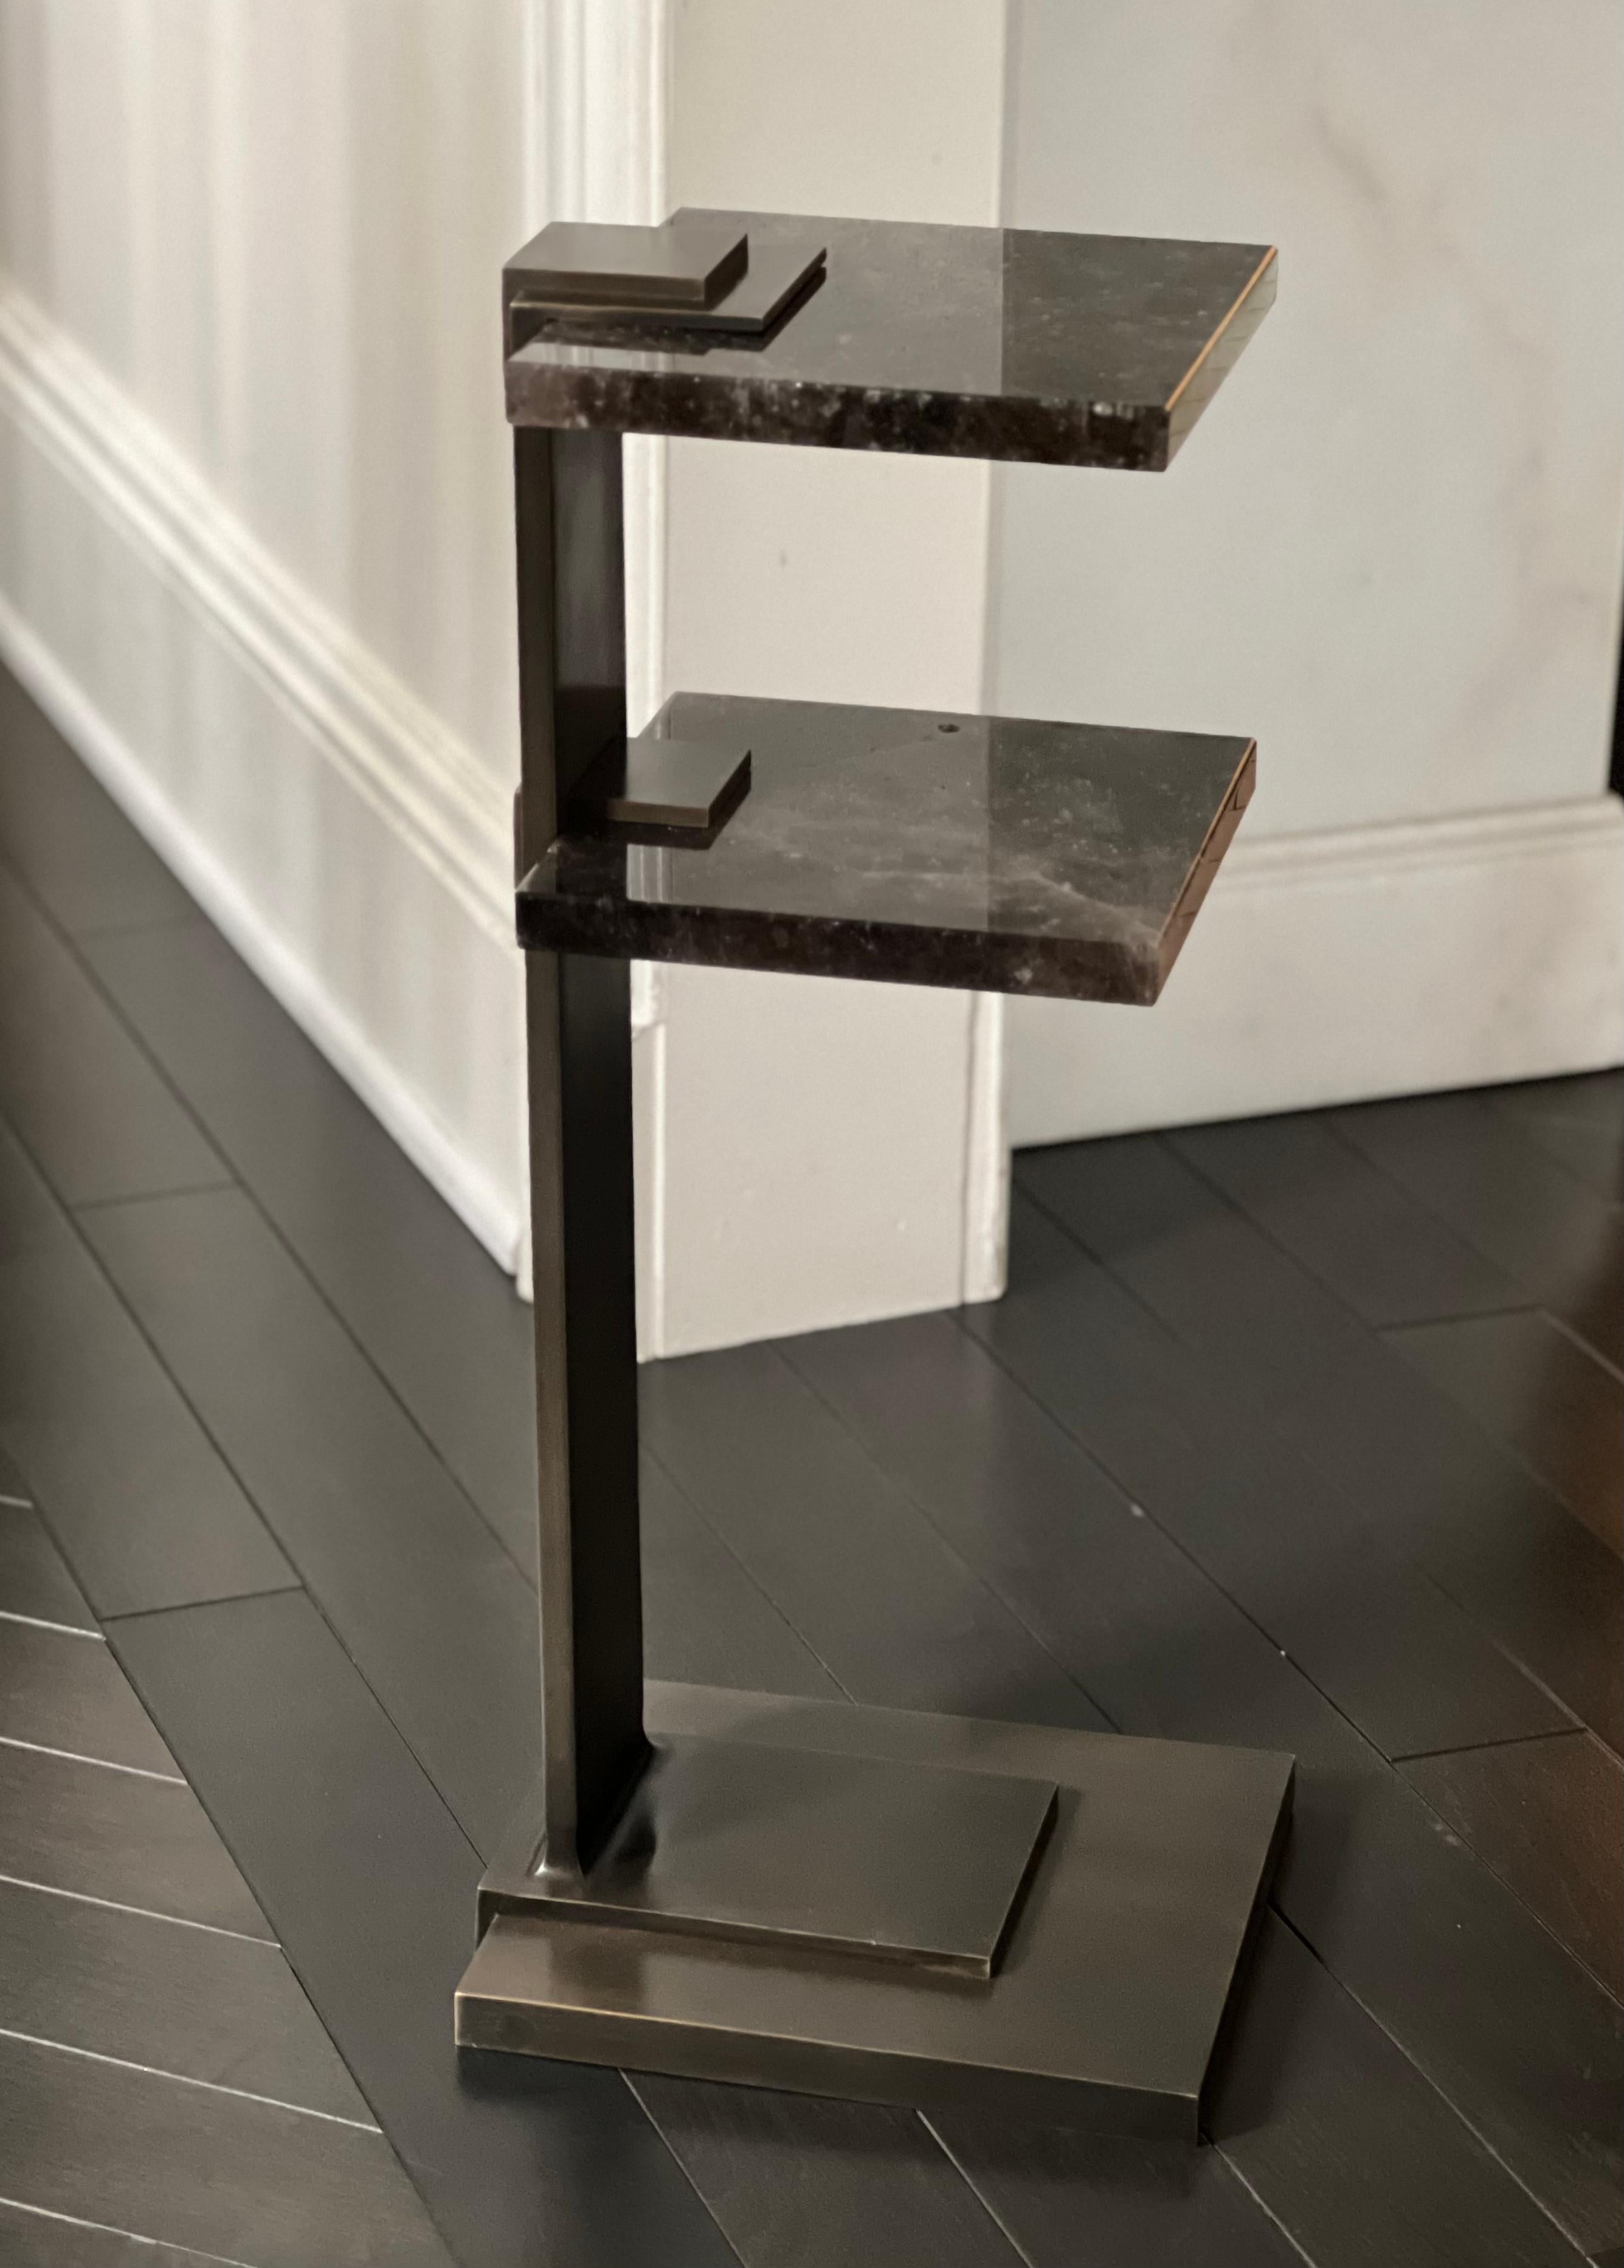 DSD Rock Crystal Drinking Table with two smoky rock crystal shelves.
Aged brass finish. Created By Phoenix Gallery.
Custom size upon request.
